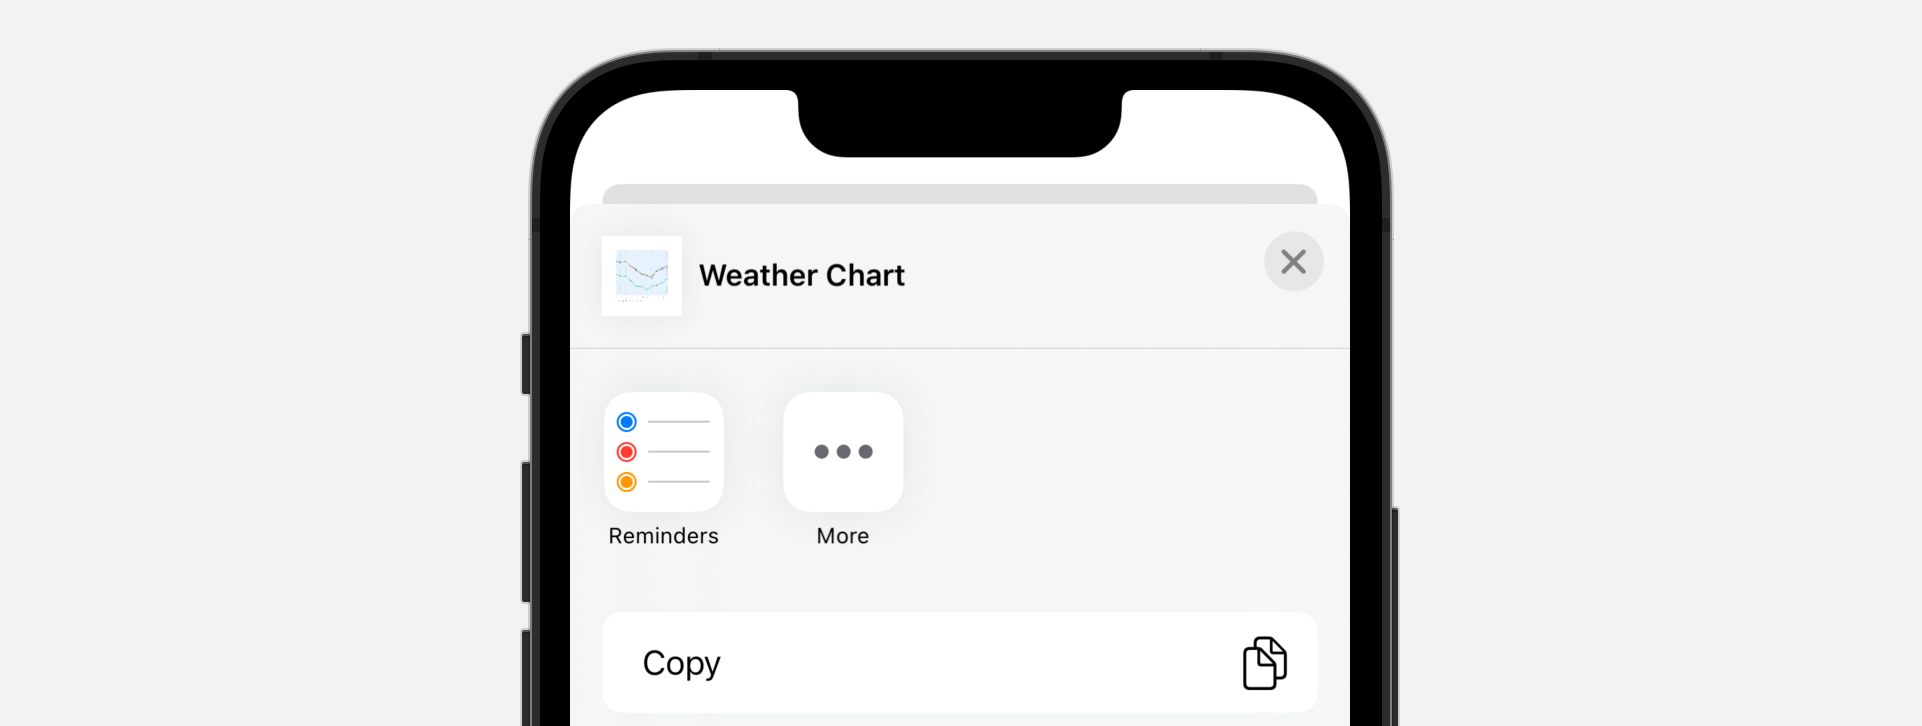 swiftui-weather-chart-imagerenderer